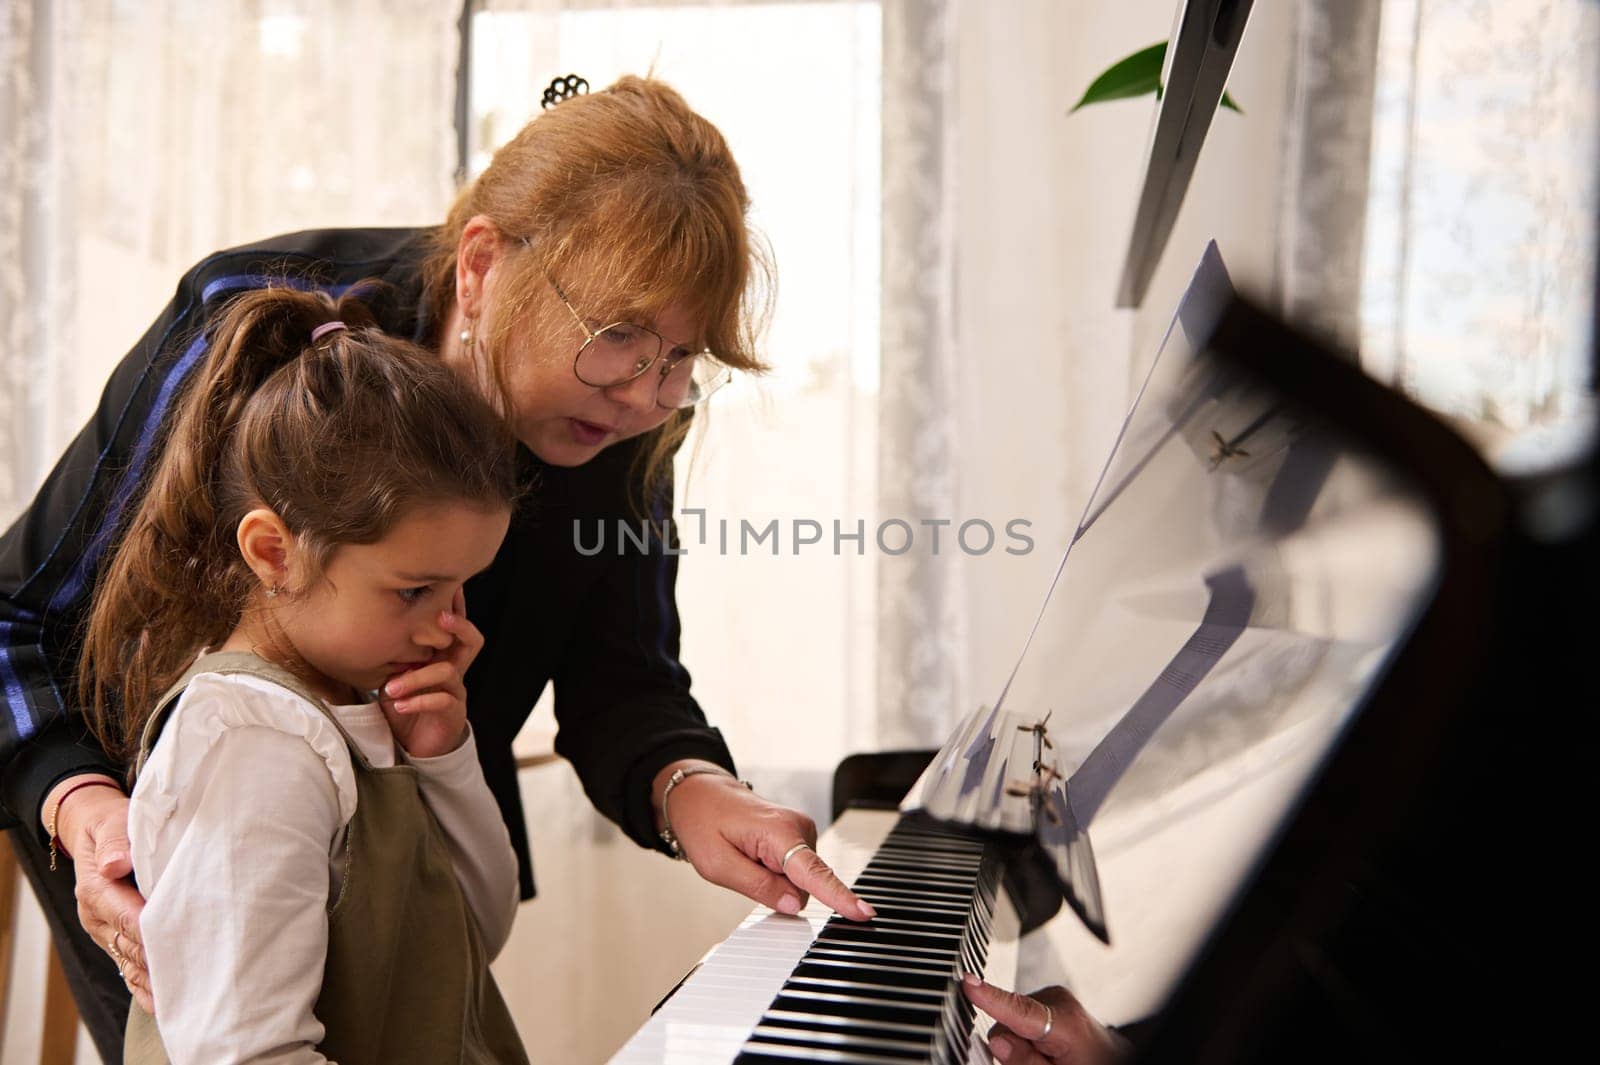 Little girl having piano lesson with female teacher musician at home, performing classic melody touching the piano keys by artgf